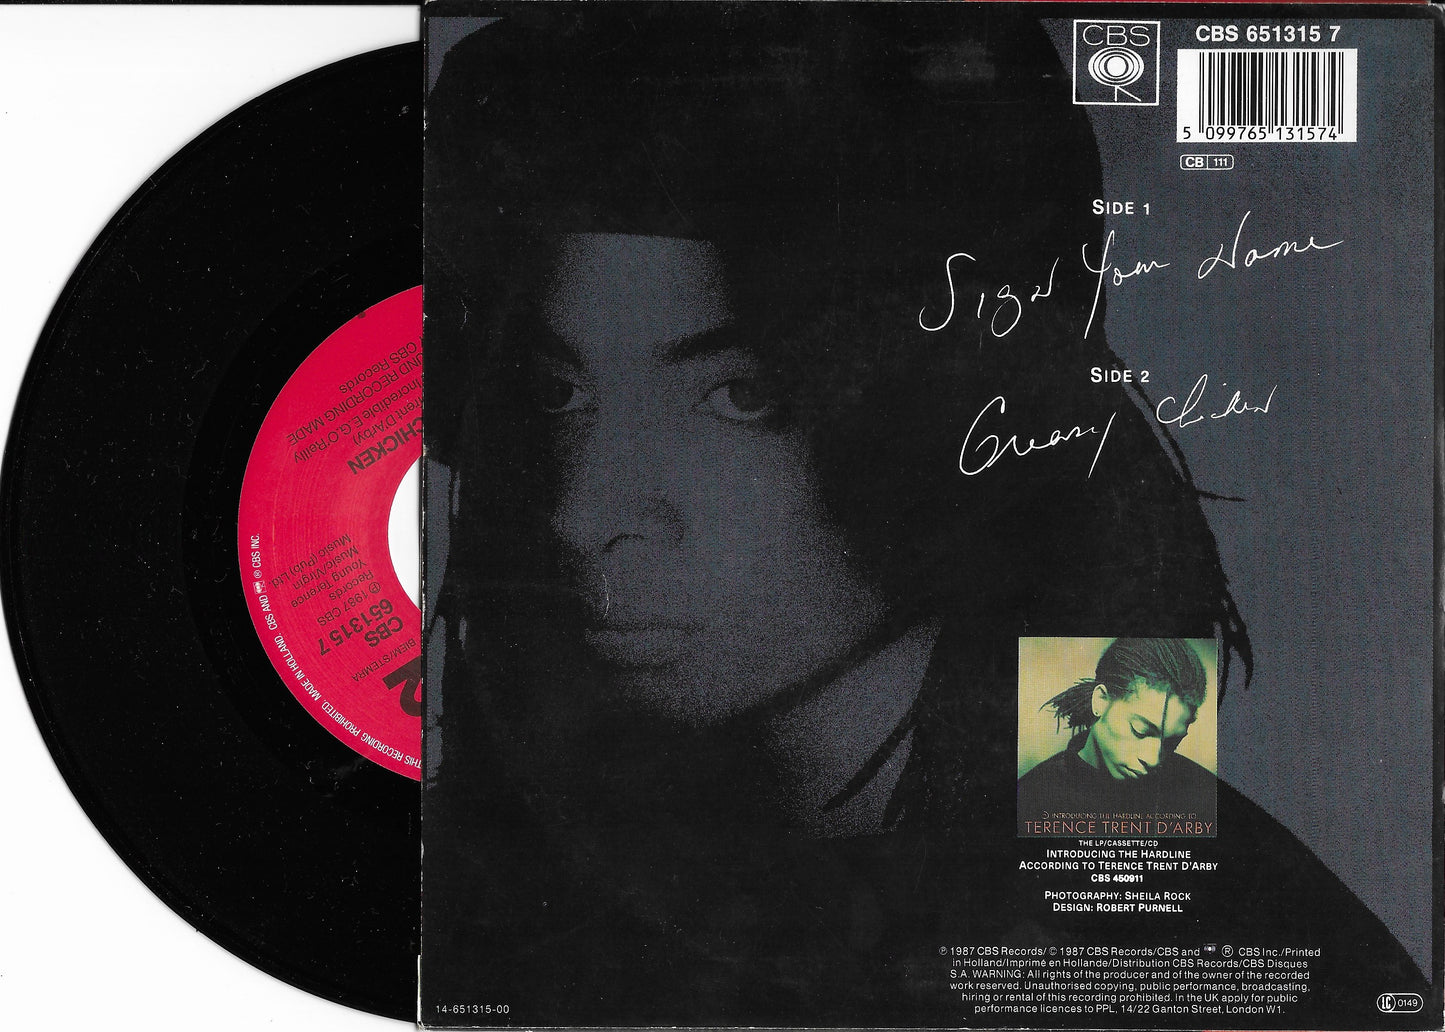 TERENCE TRENT D'ARBY - Sign Your Name